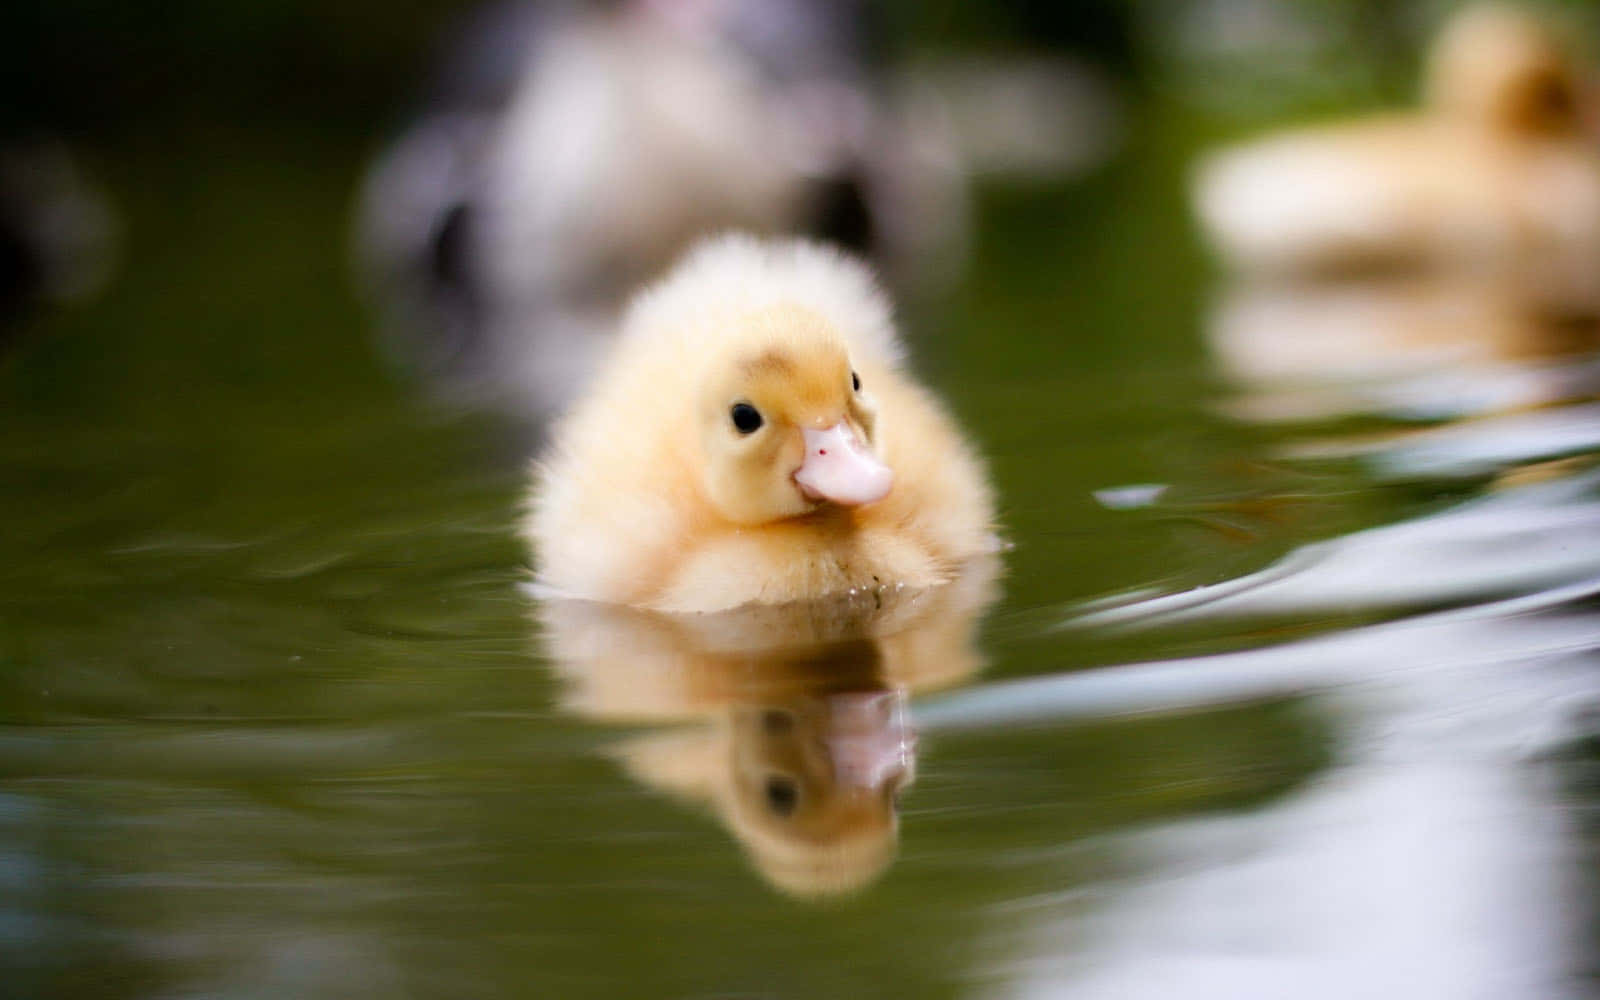 "Look at this Adorable Duck!" Wallpaper